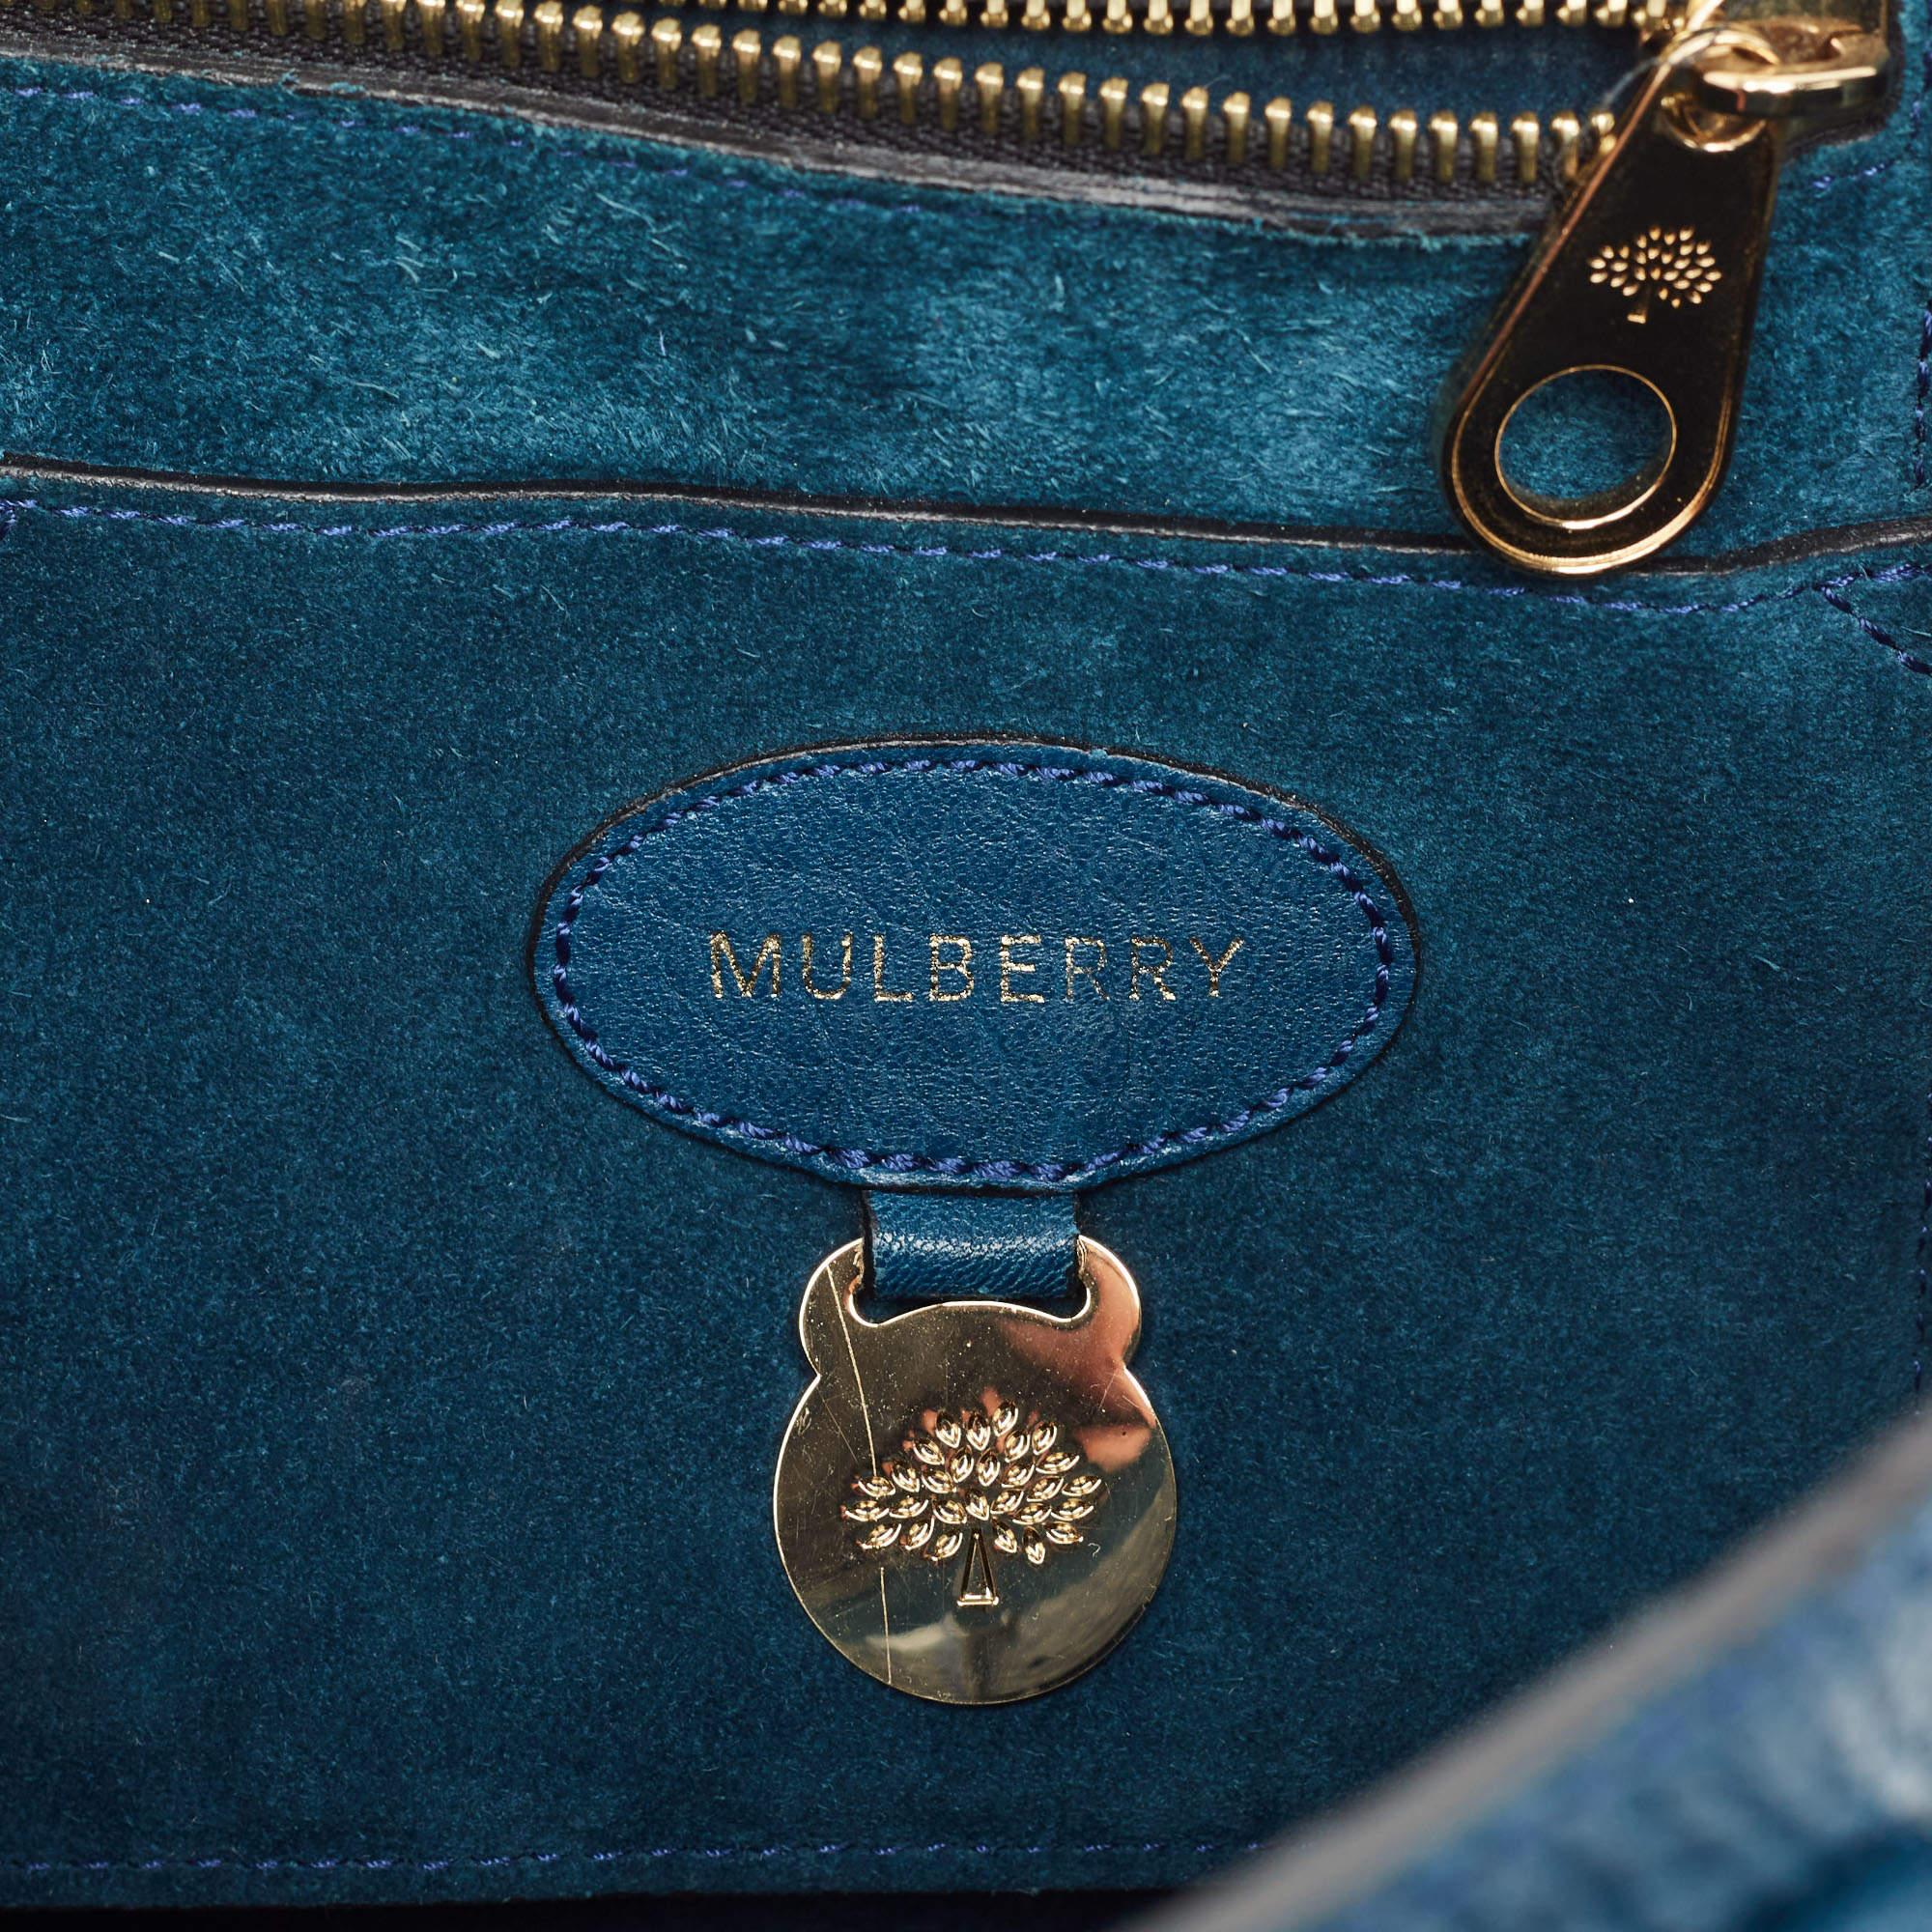 Mulberry Teal Blue Leather Bayswater Satchel For Sale 10